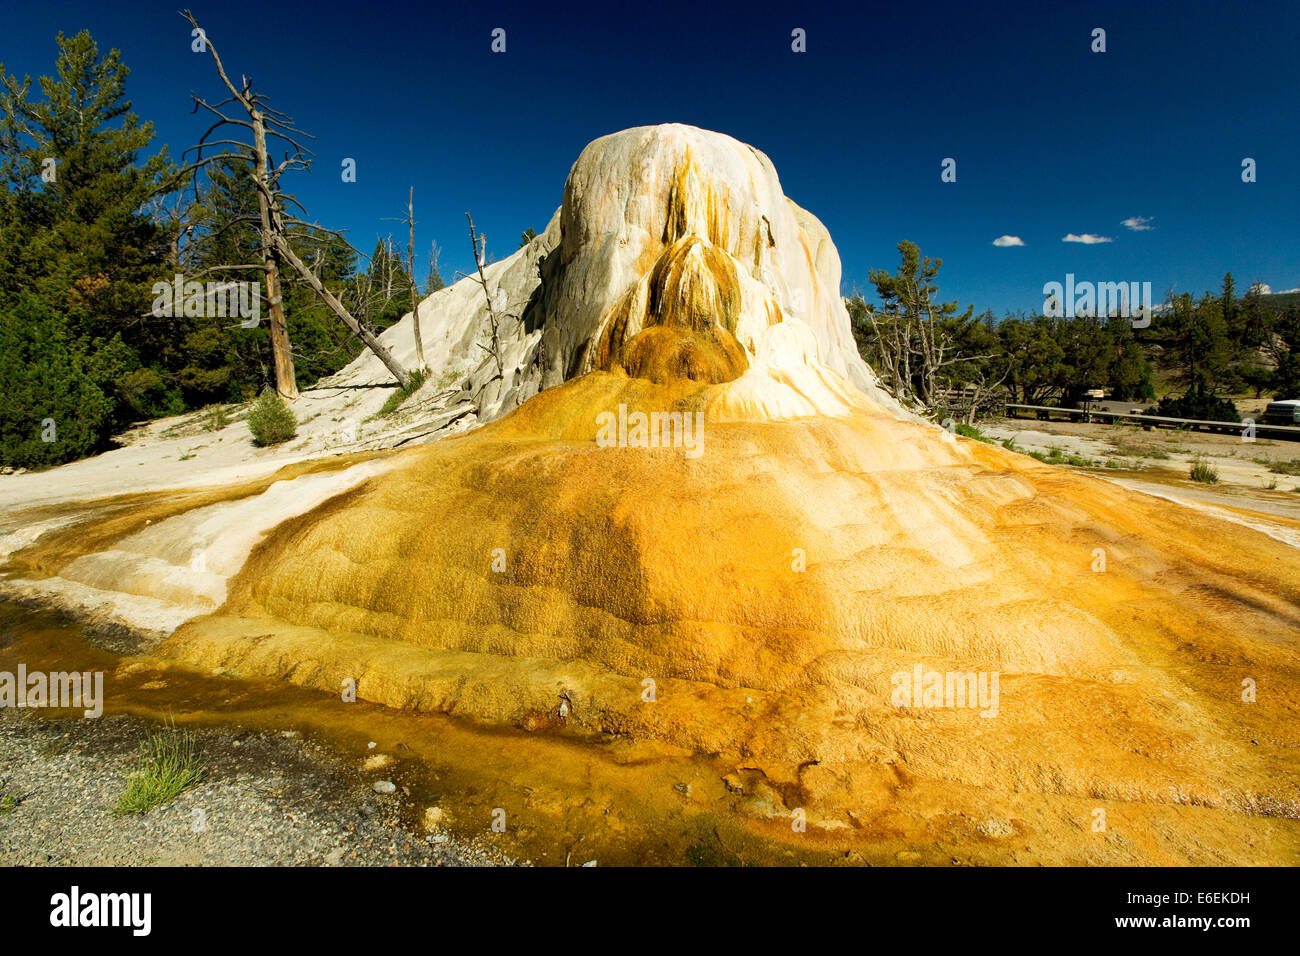 Elephant hot spring at Mammoth geothermal area, Yellowstone national park, Wyoming, US Stock Photo